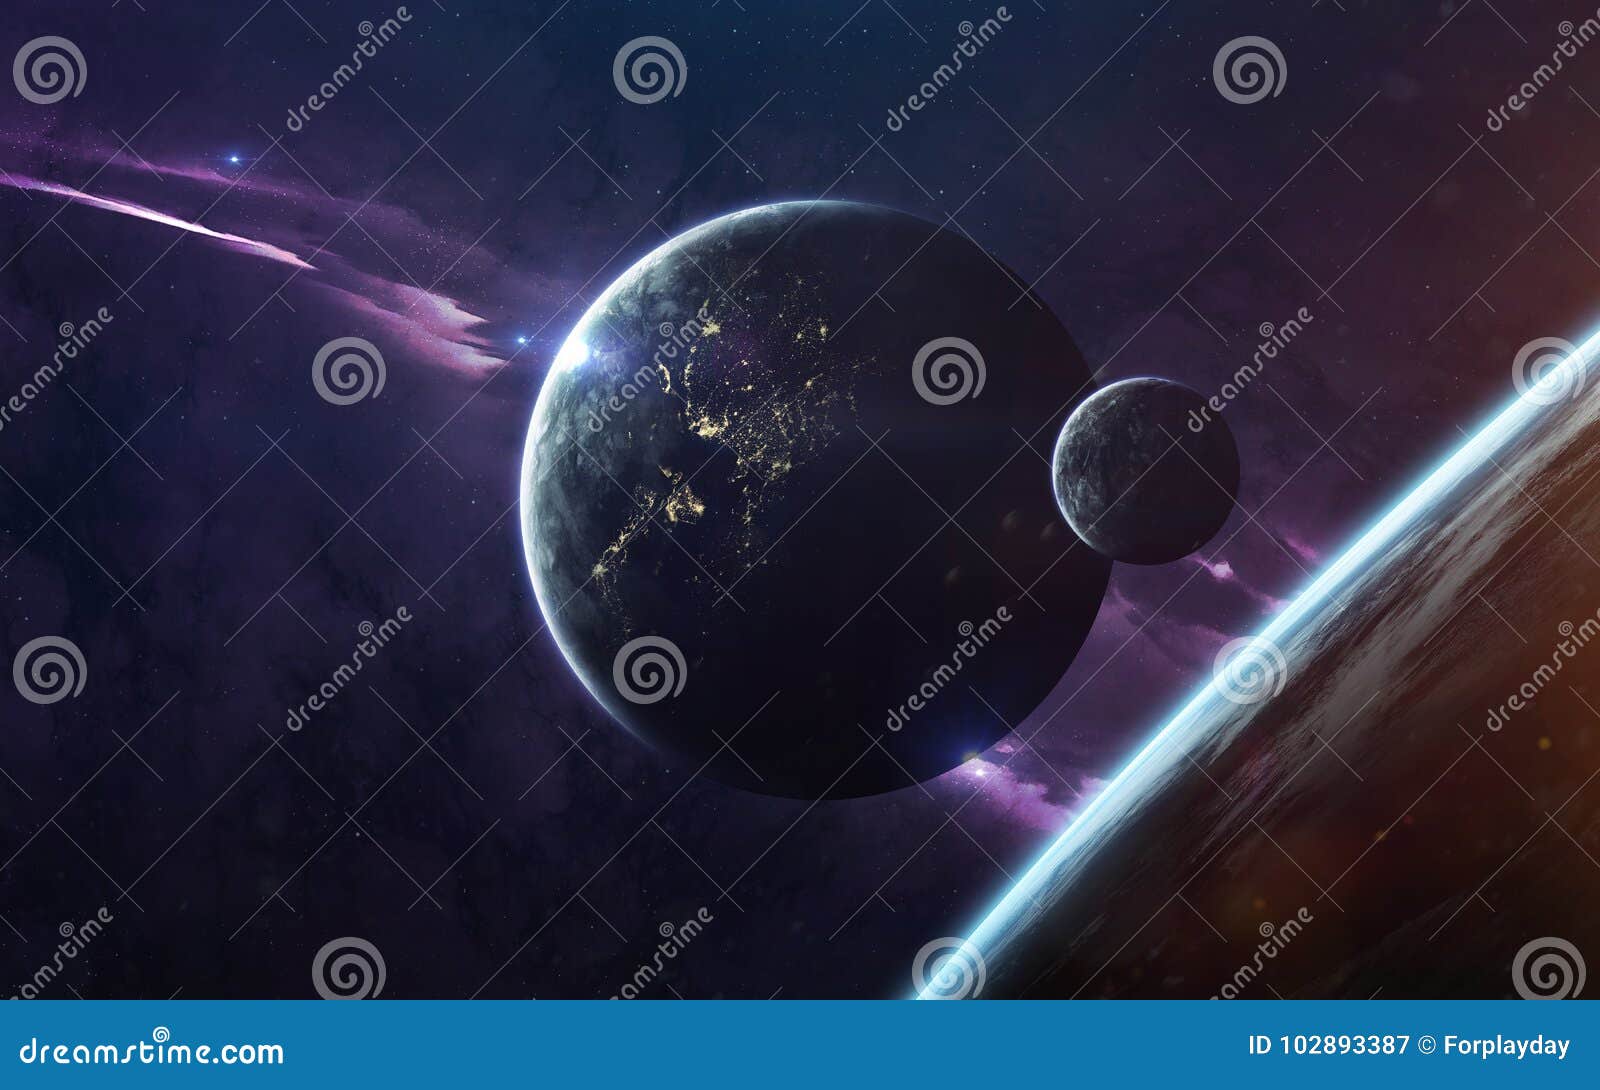 space science fiction image. this image s furnished by nasa